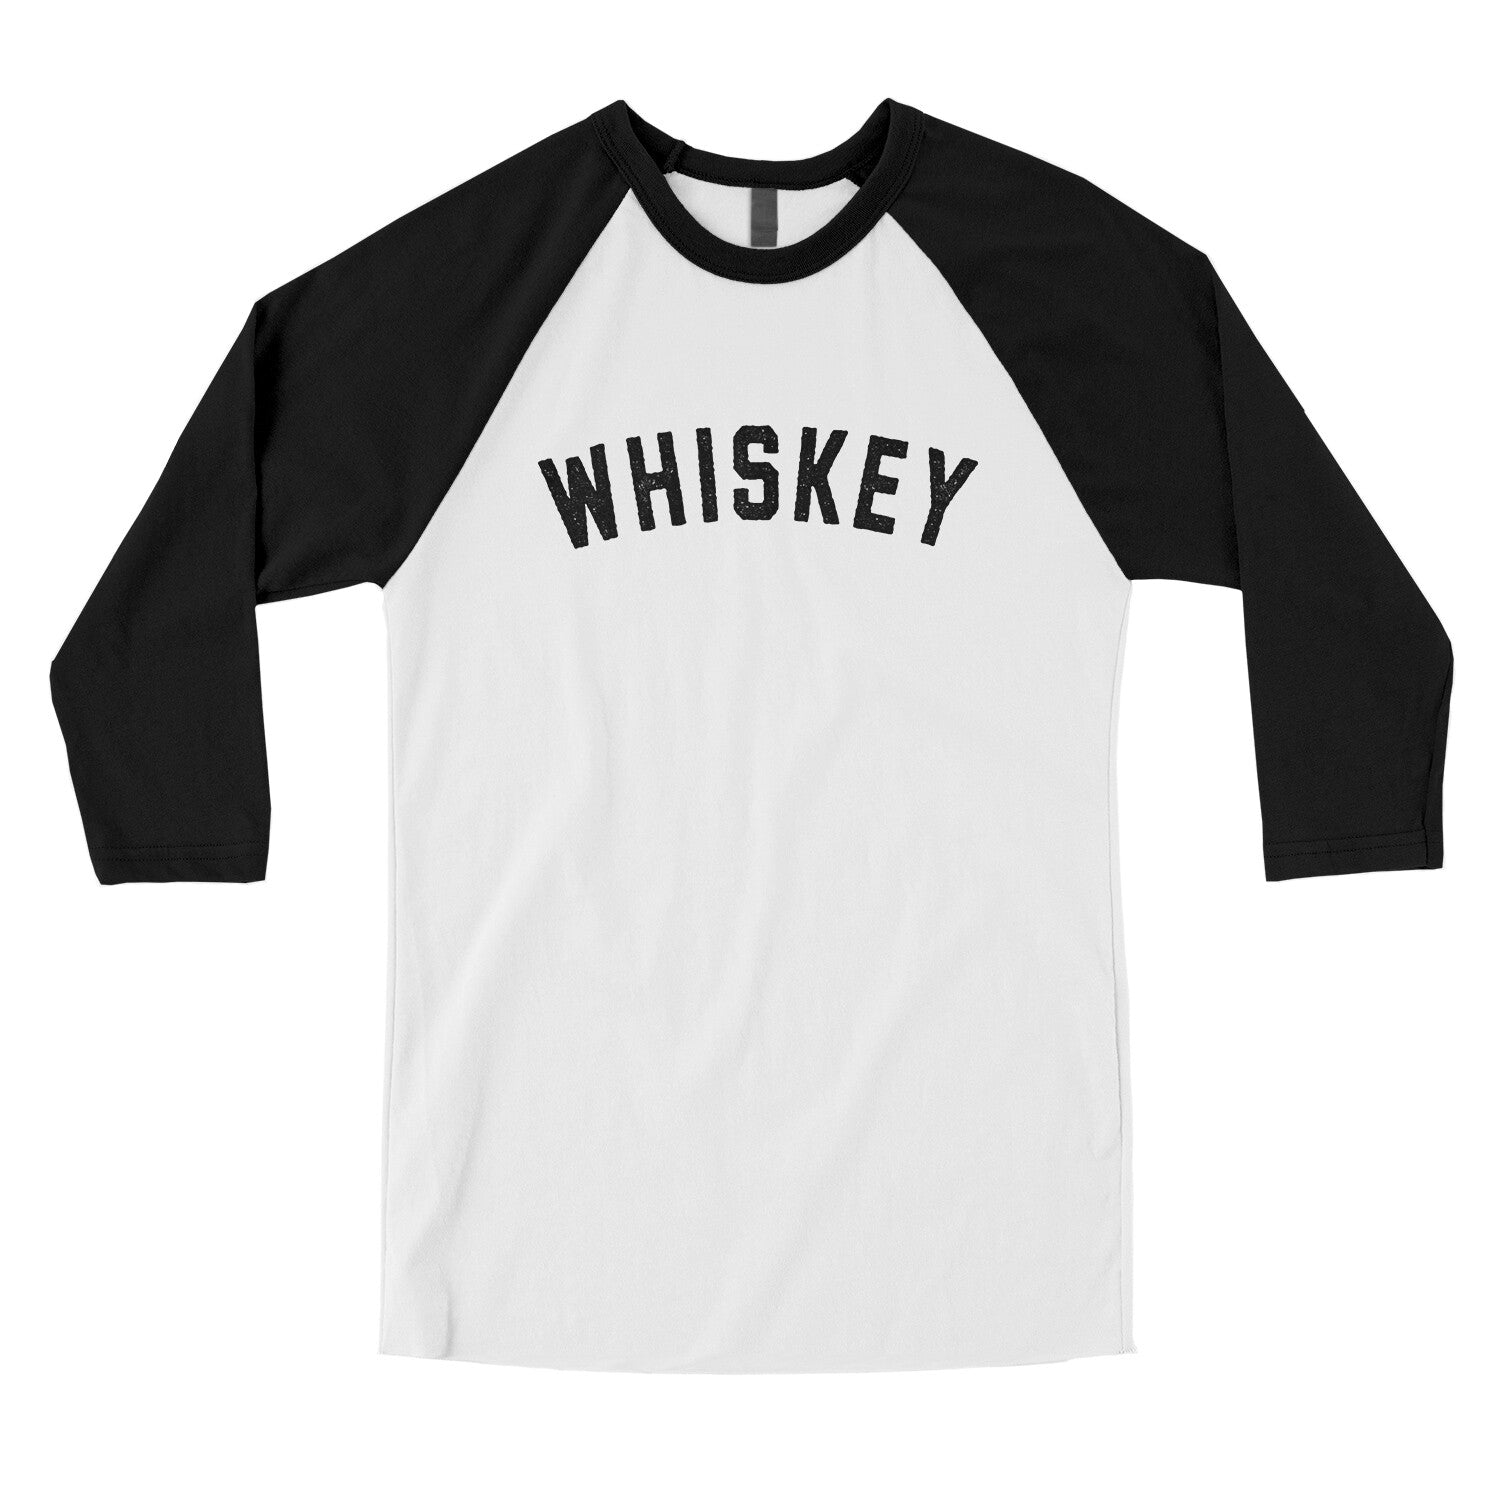 Whiskey in White with Black Color